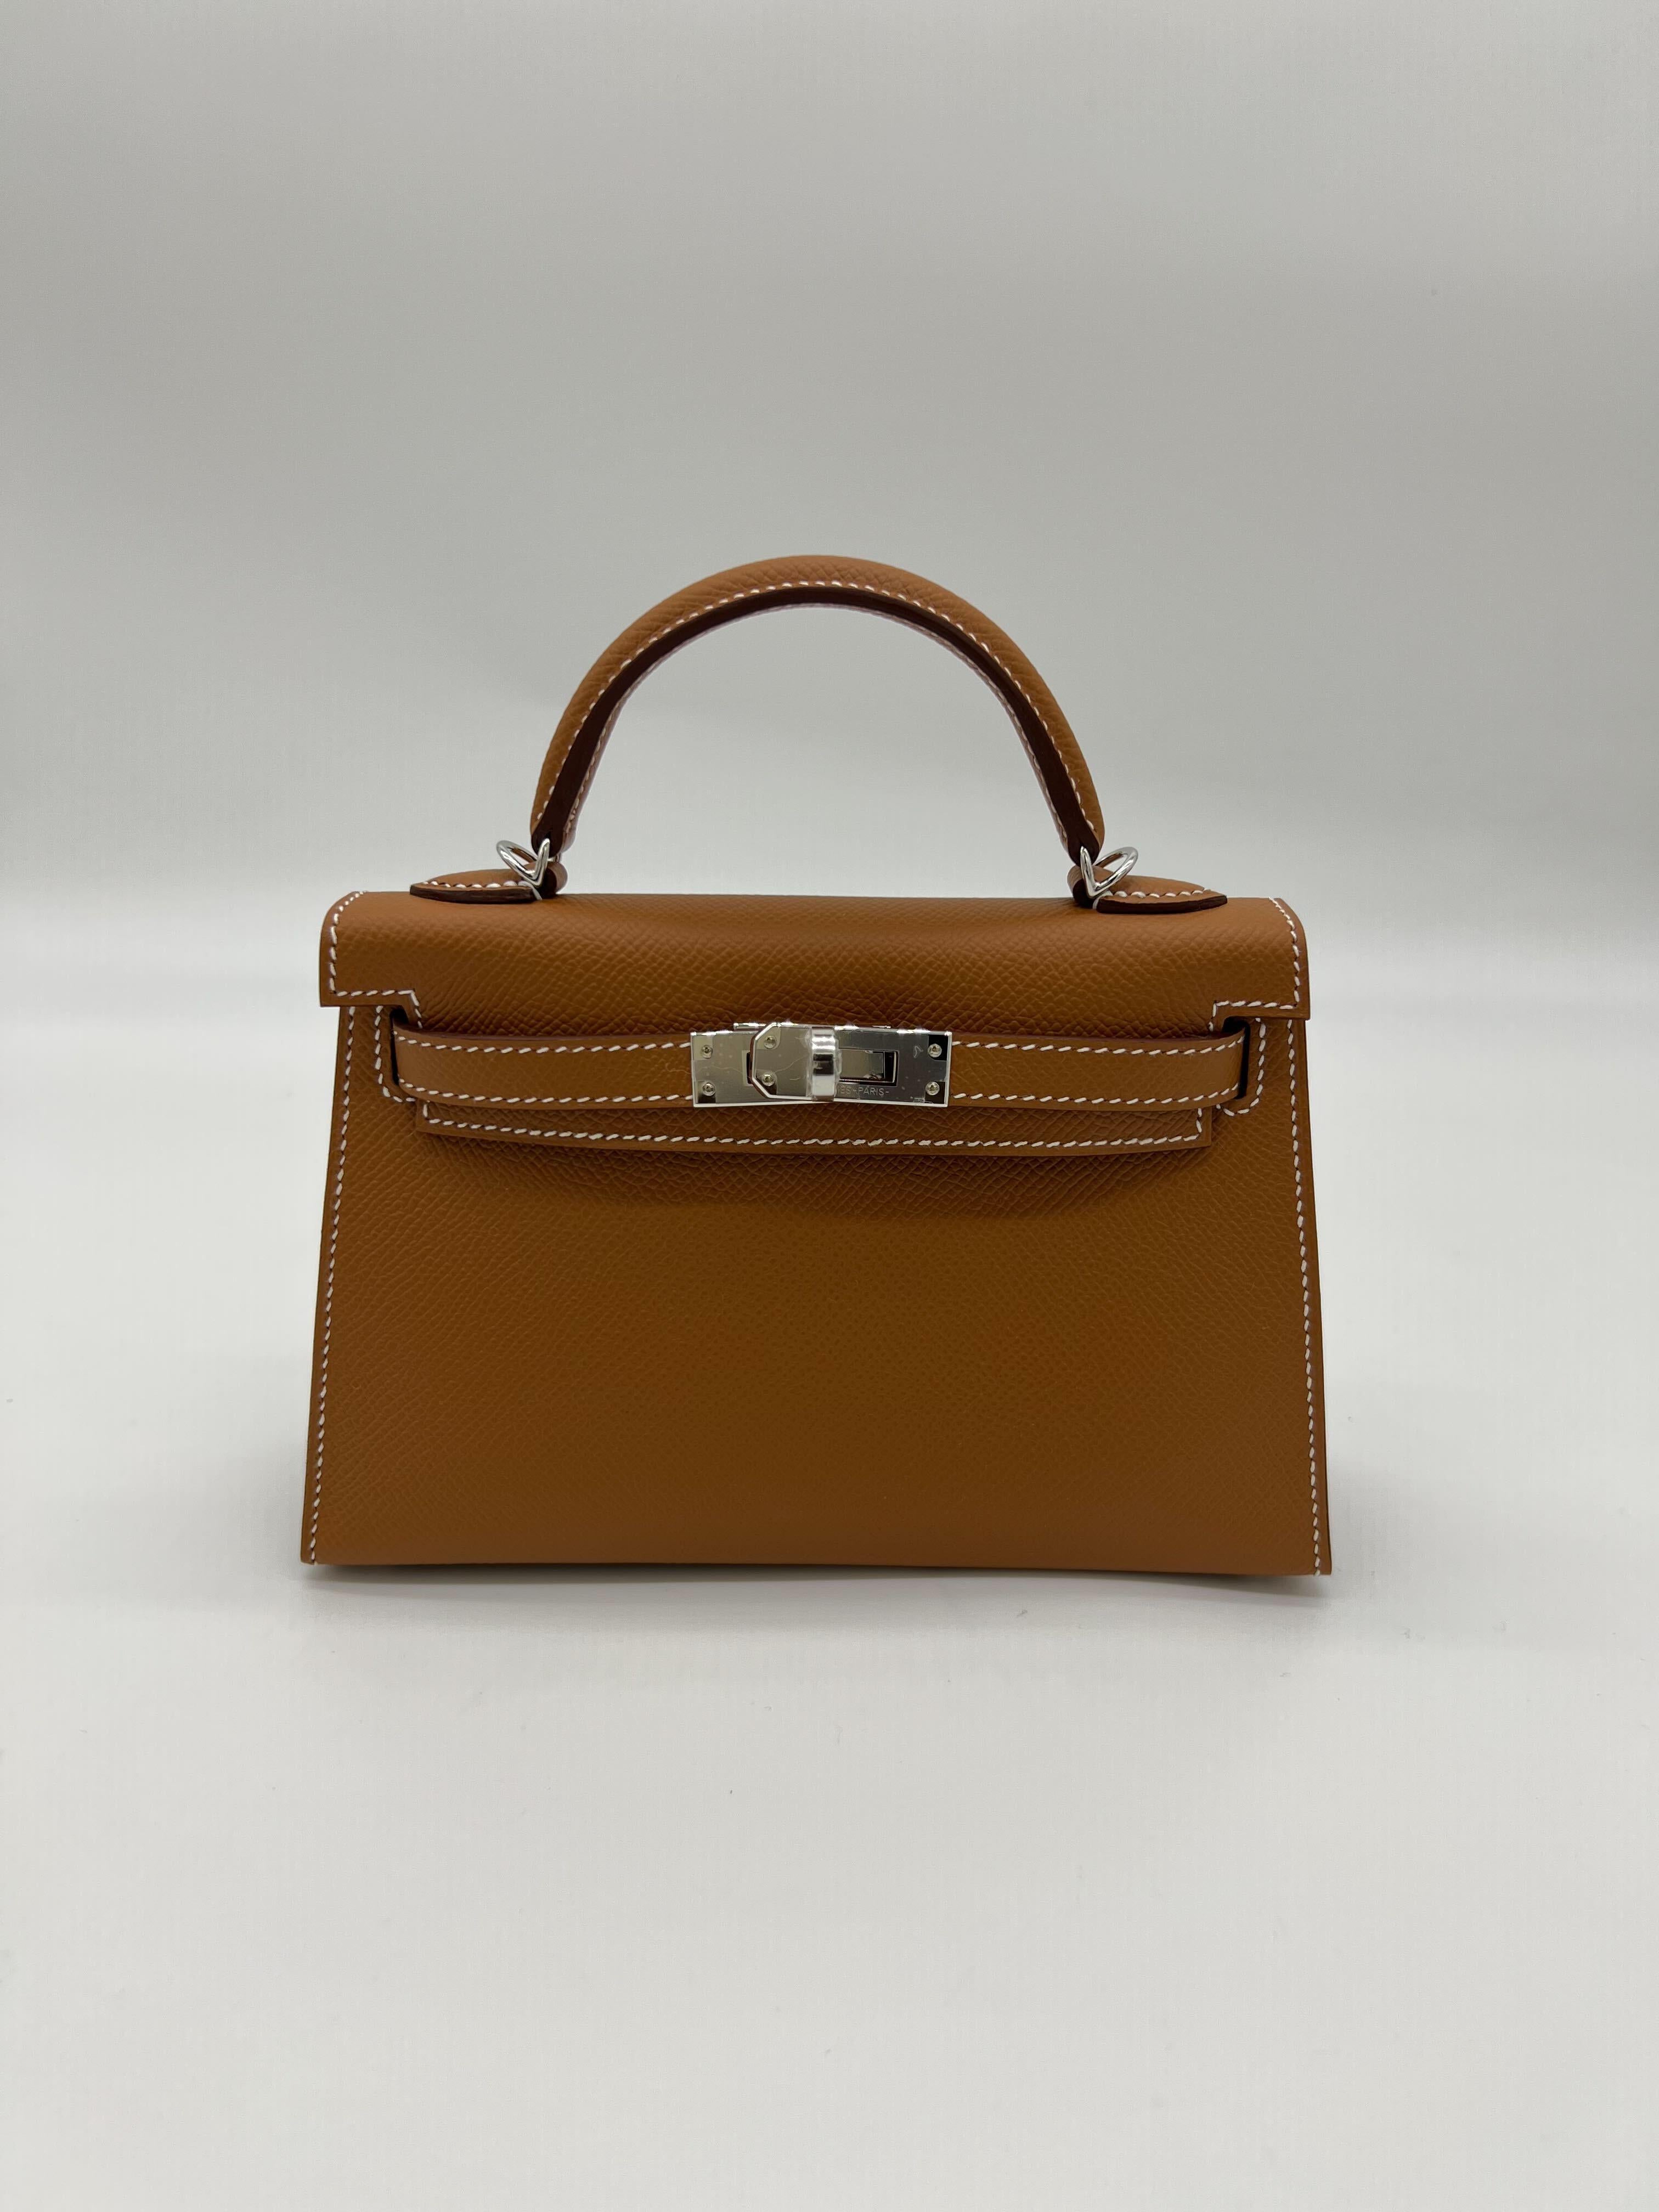 Hermes Kelly 20 Mini II Sellier Gold Veau Epsom Leather Palladium Hardware

Condition & Year: New 2023
Material: Epsom Leather
Measurements: 20cm x 16cm x 10cm
Hardware: Palladium 

*Comes with full original packaging.
*Full plastic on hardware.